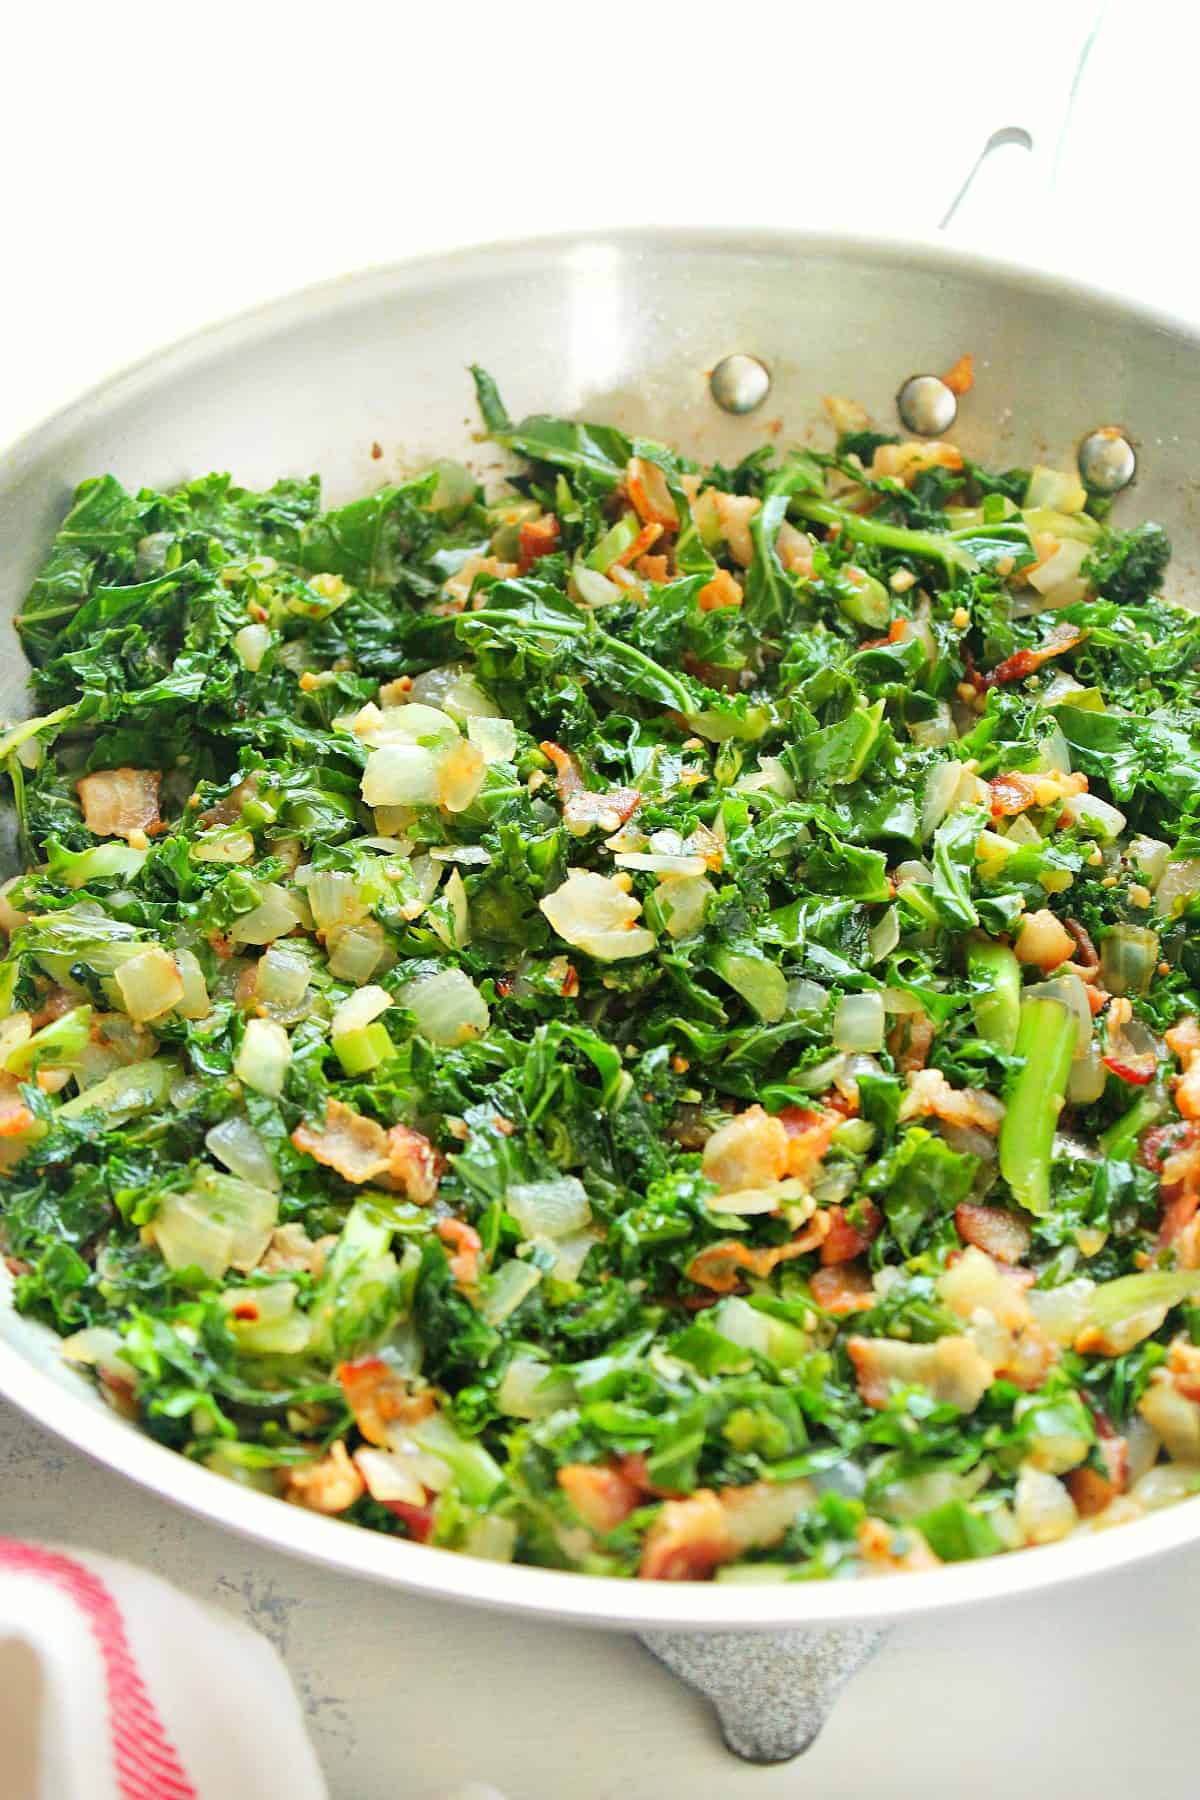 Sauteed kale in a skillet.